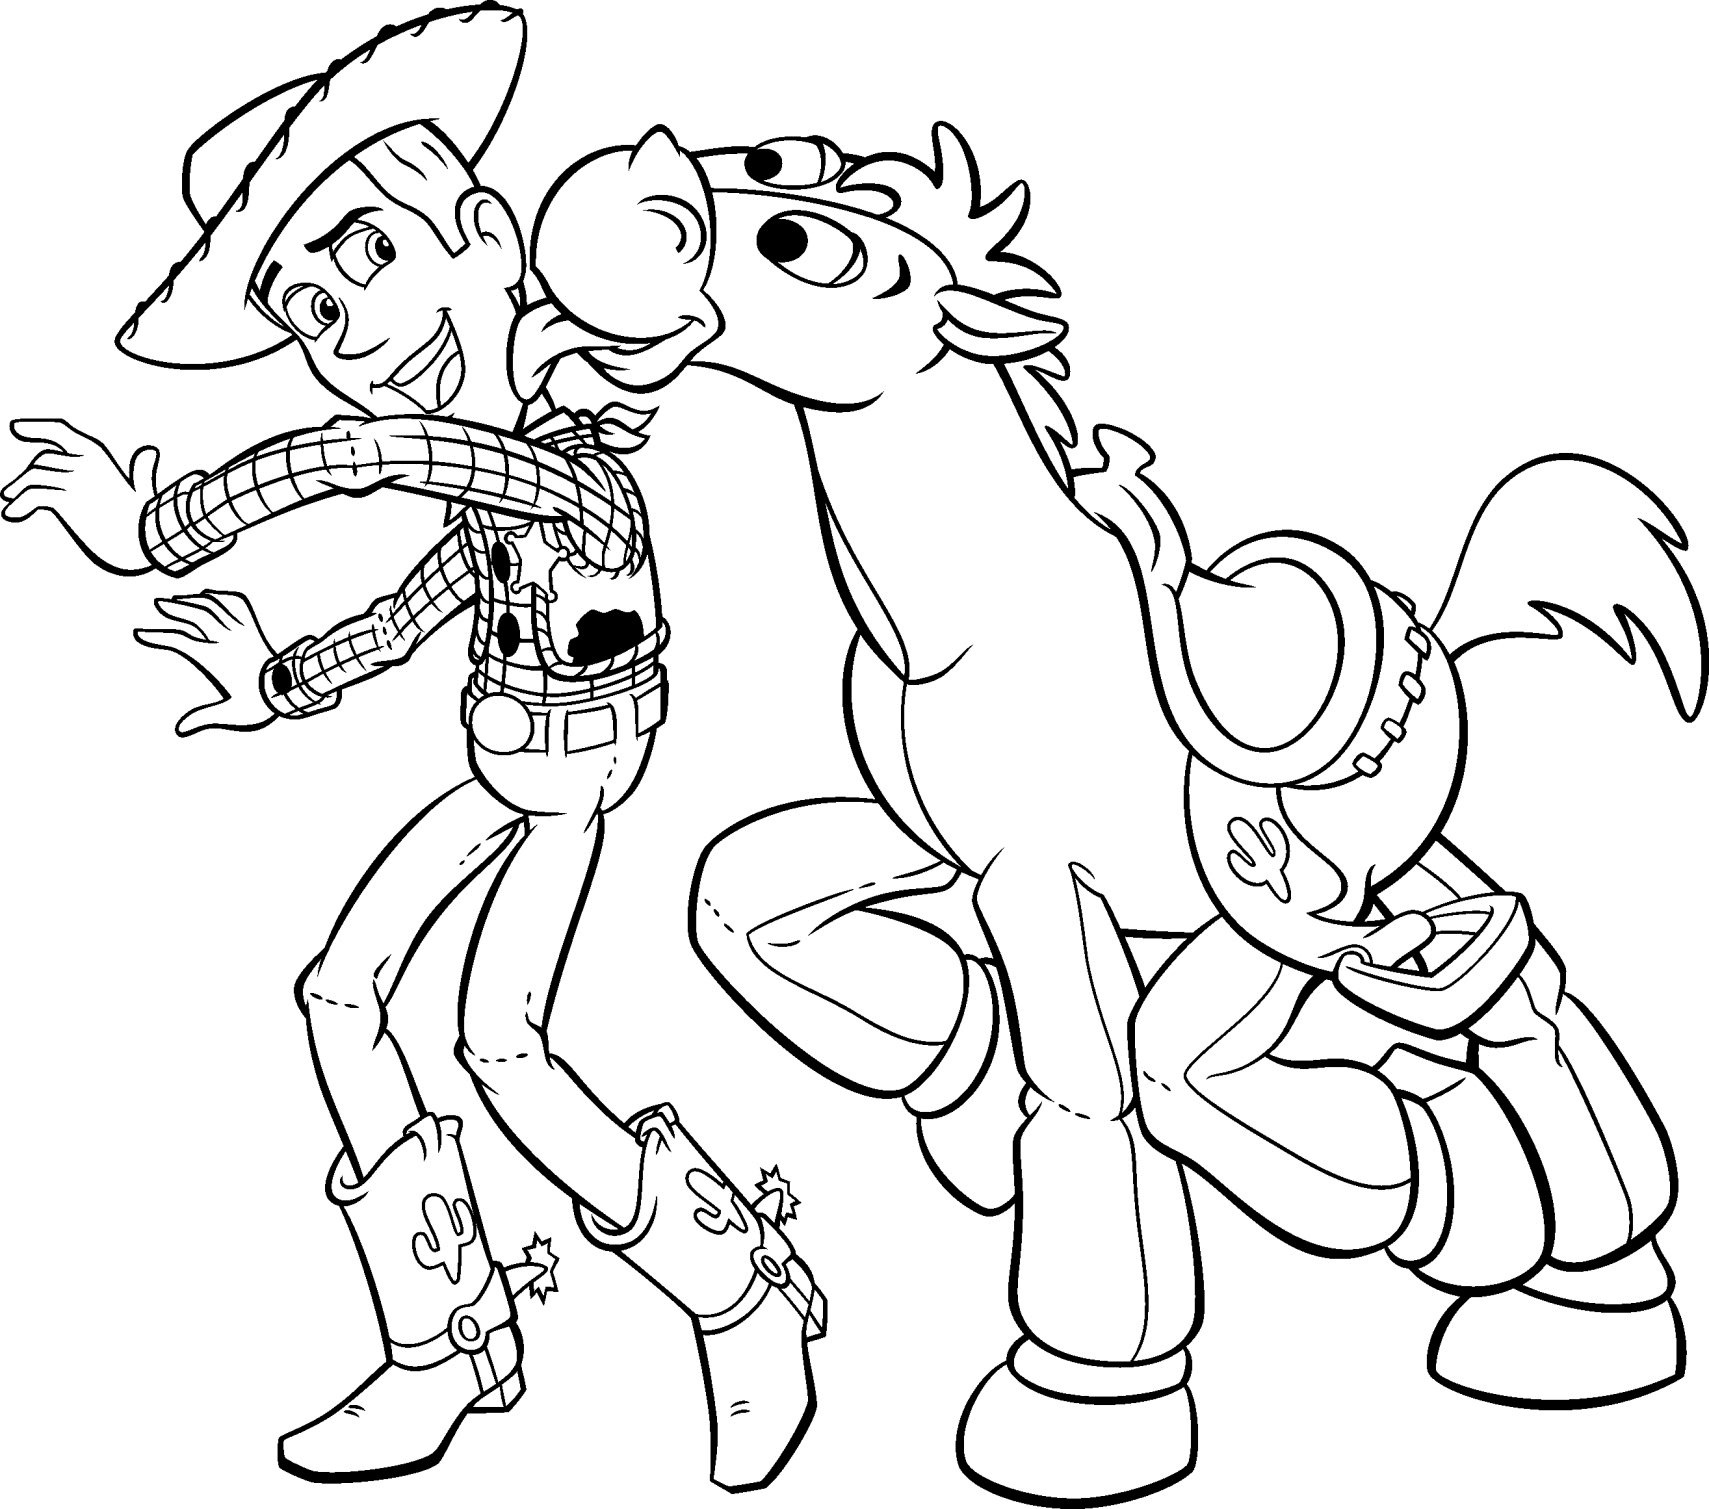 Toy Story Clipart Black And White.